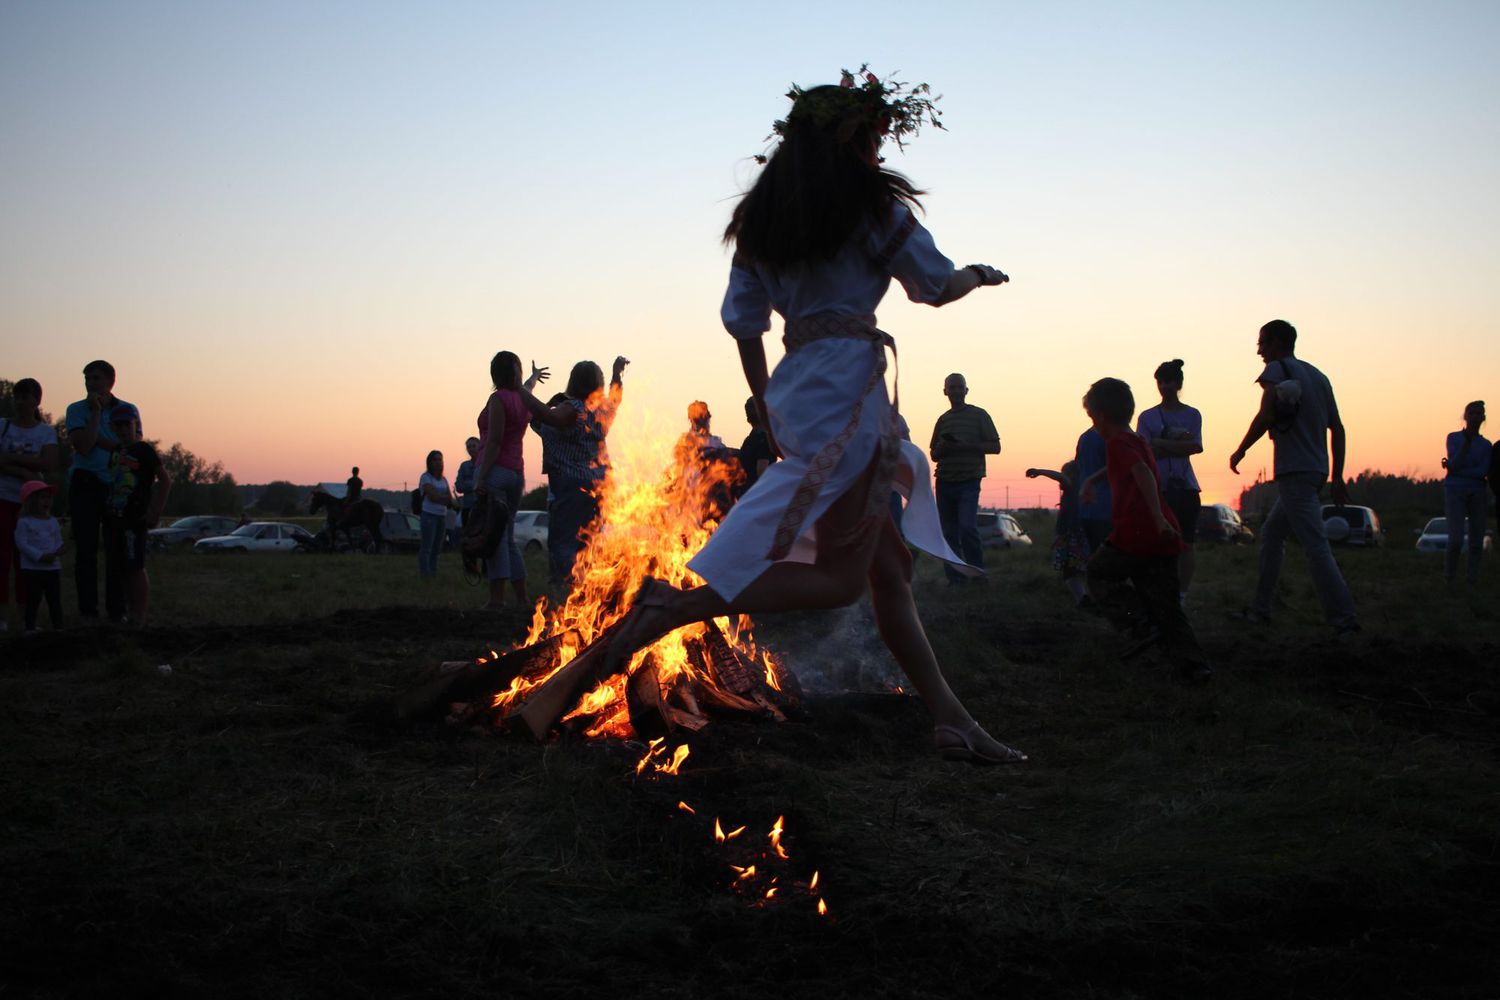 <p>In Eastern Europe, the summer solstice coincides with Ivan Kupala Day, which is associated with falling in love.</p>
                            <p>Traditionally, young unmarried women would float floral wreaths in the river with candles as bachelors awaited on the other side to catch them.</p>
                            <p>If caught, they would become a couple. Couples would also leap through the flames of a bonfire together while holding hands, if they don't let go then their love is said to last.</p>
                            